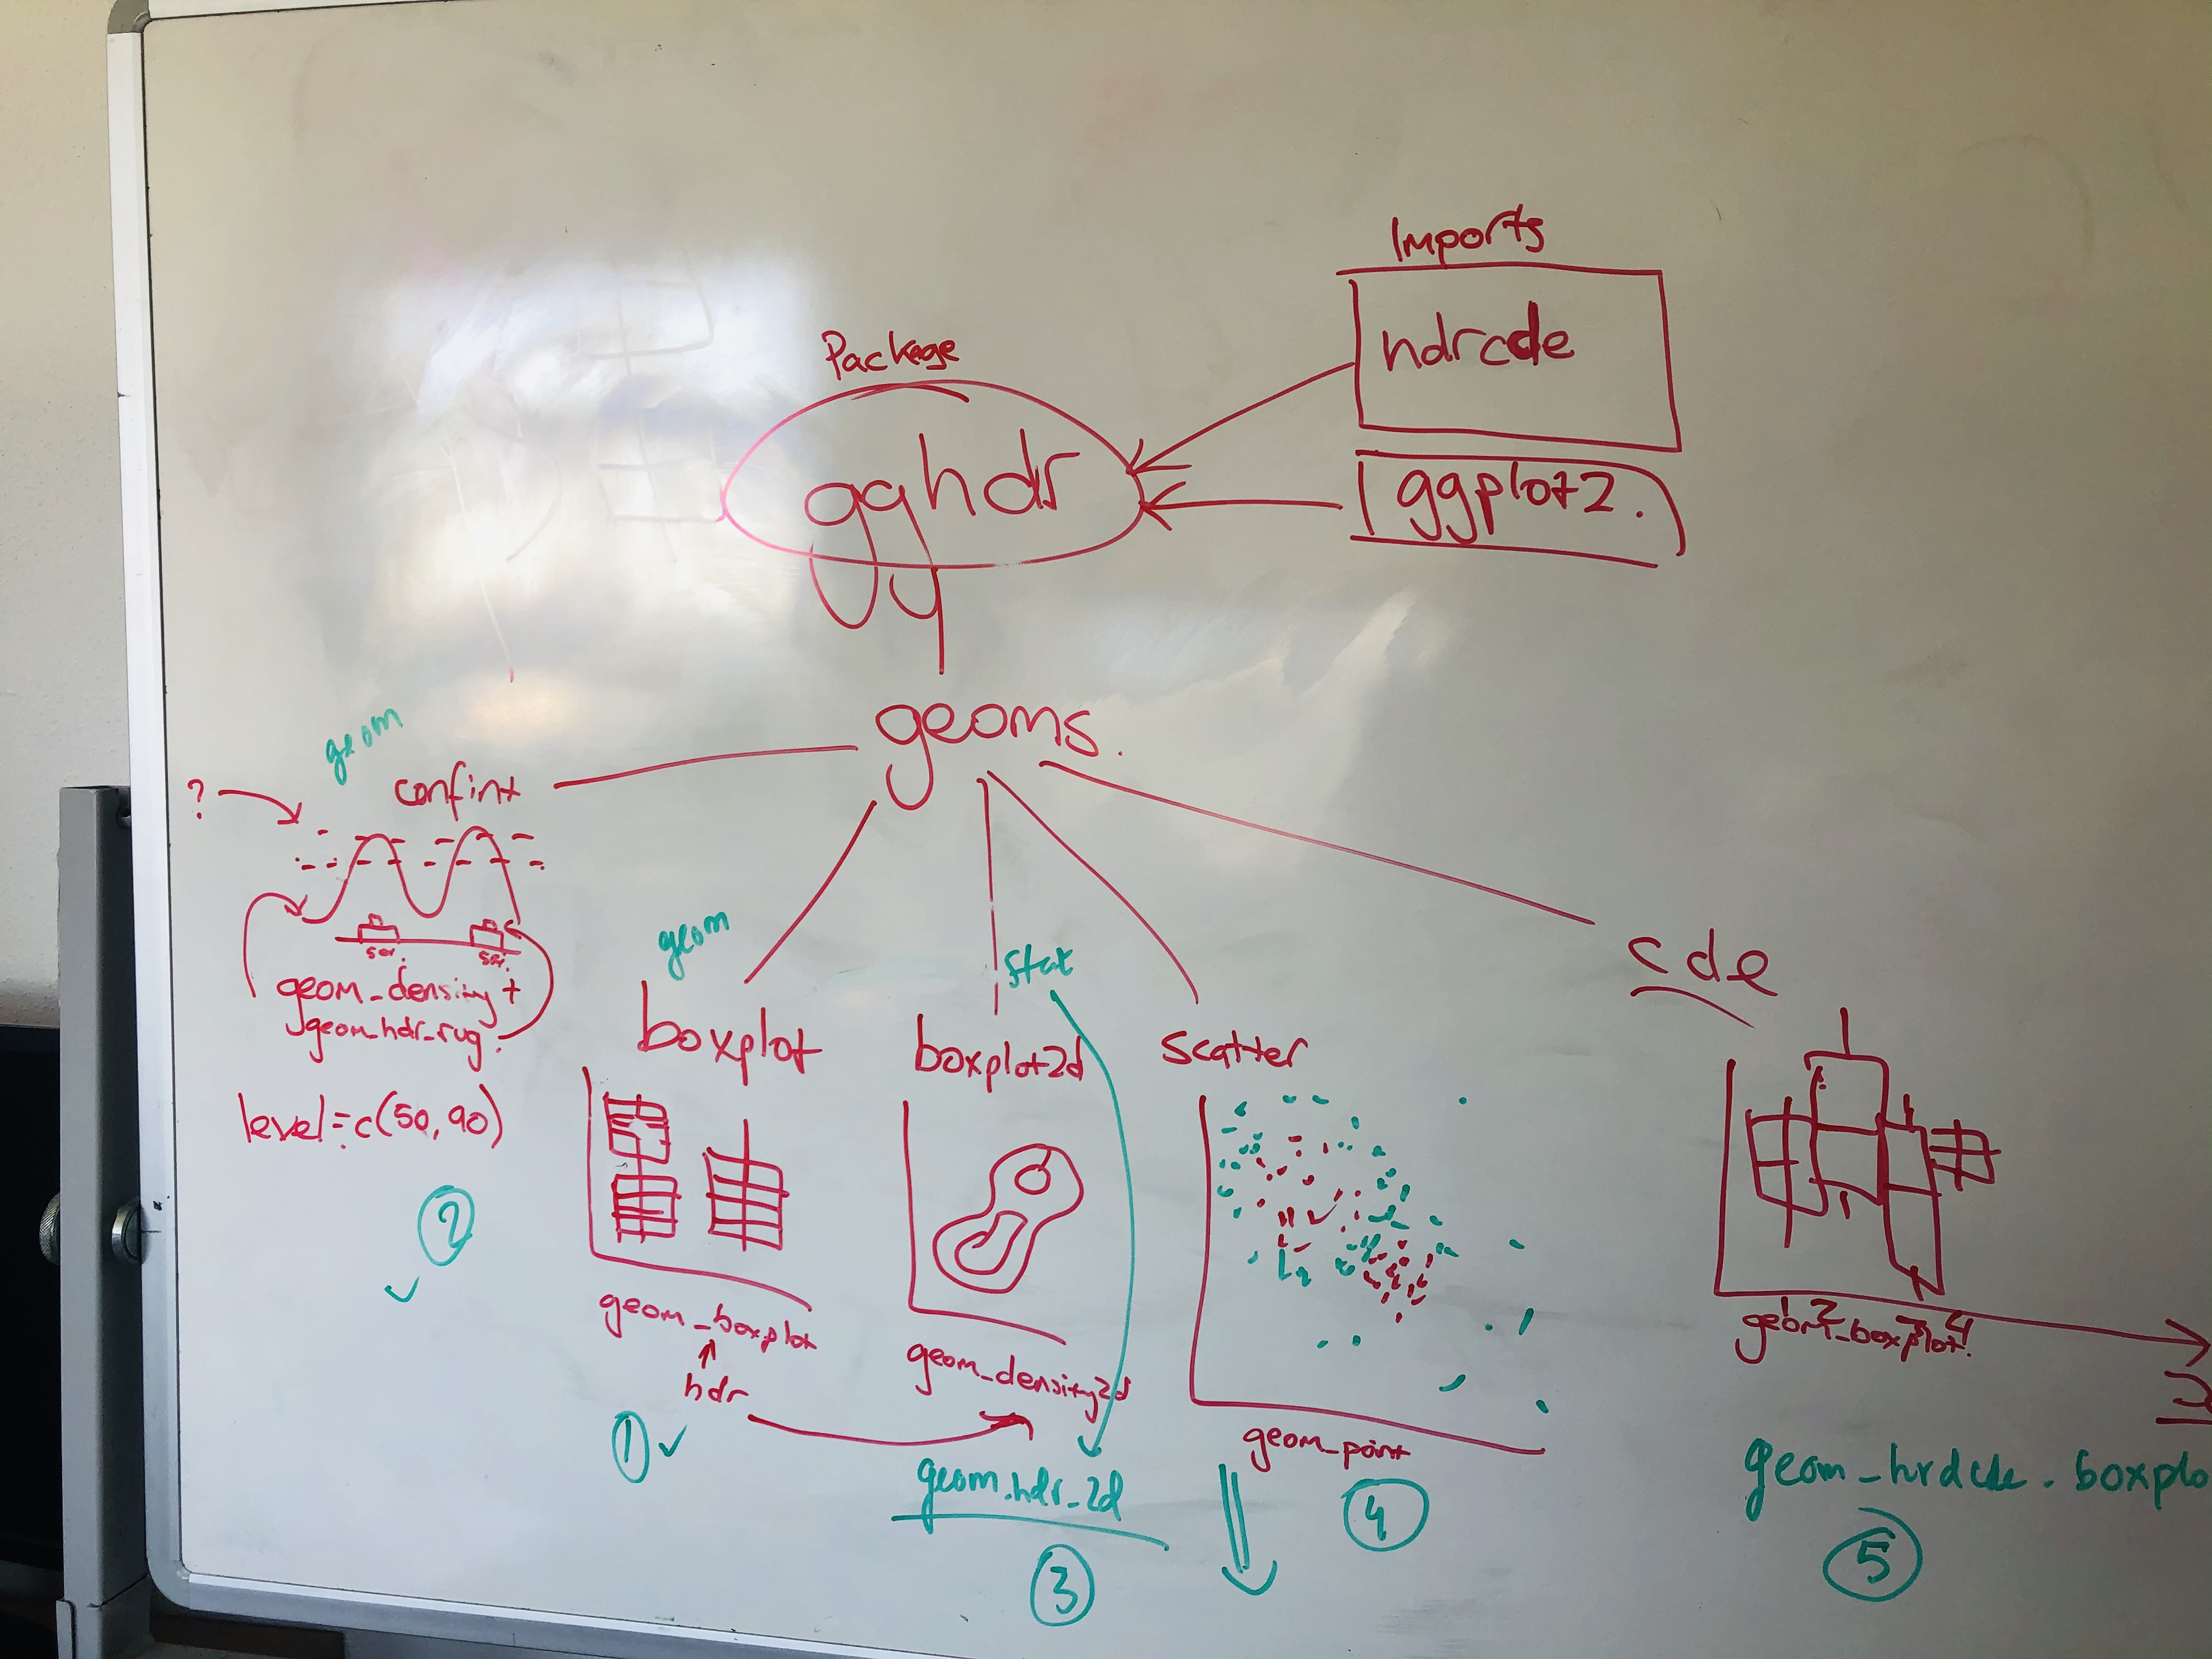 A white board with flow diagrams worked out in red marker. gghdr is in the centre with arrows leading to sections for confint, boxplot, bxplot2d, scatter and cde